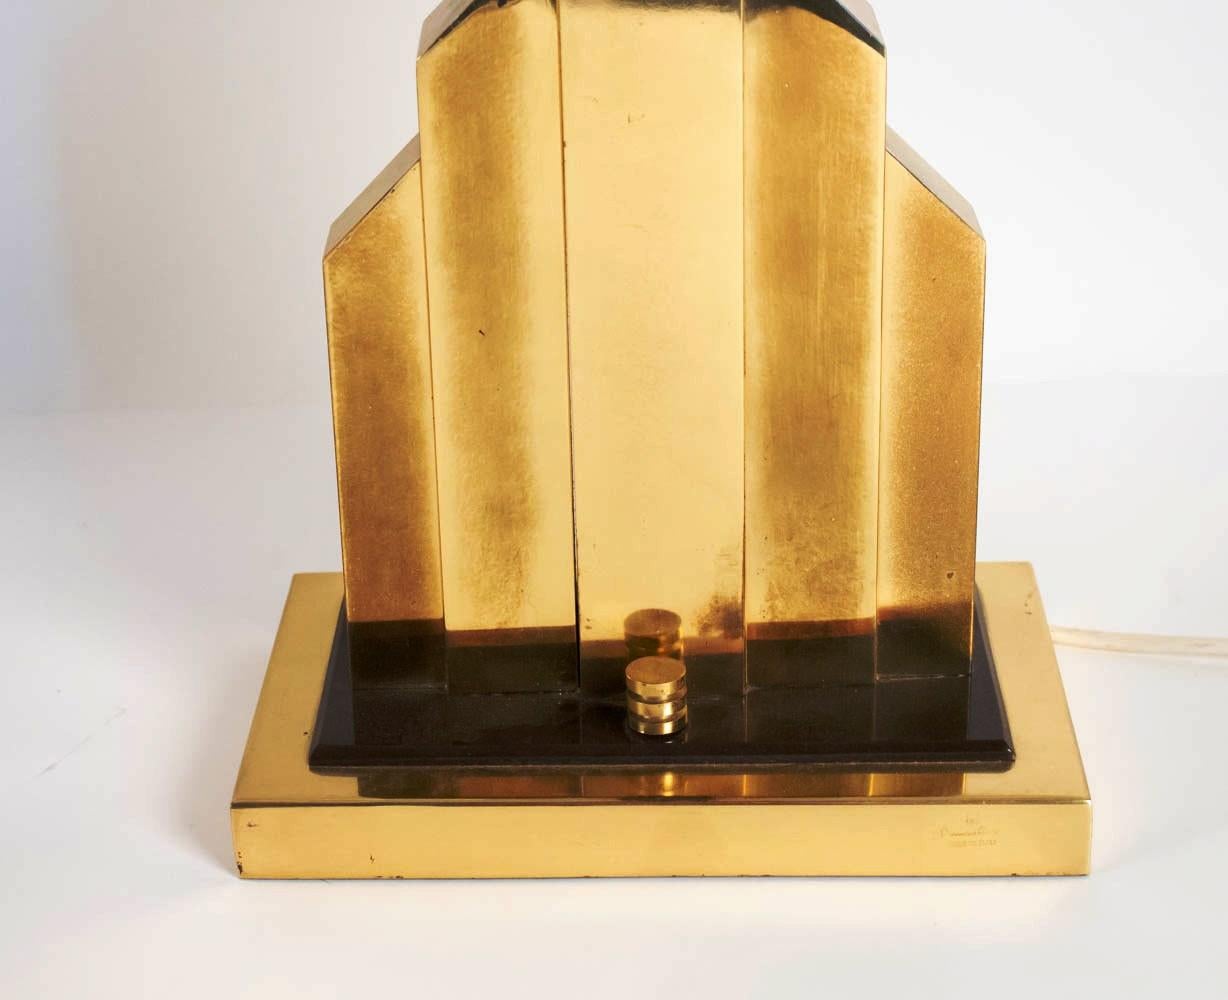 Gilt Unique Rare Pair of Table Lamps by Romeo Rega, Brass and Bakelite, Italy, 1970s